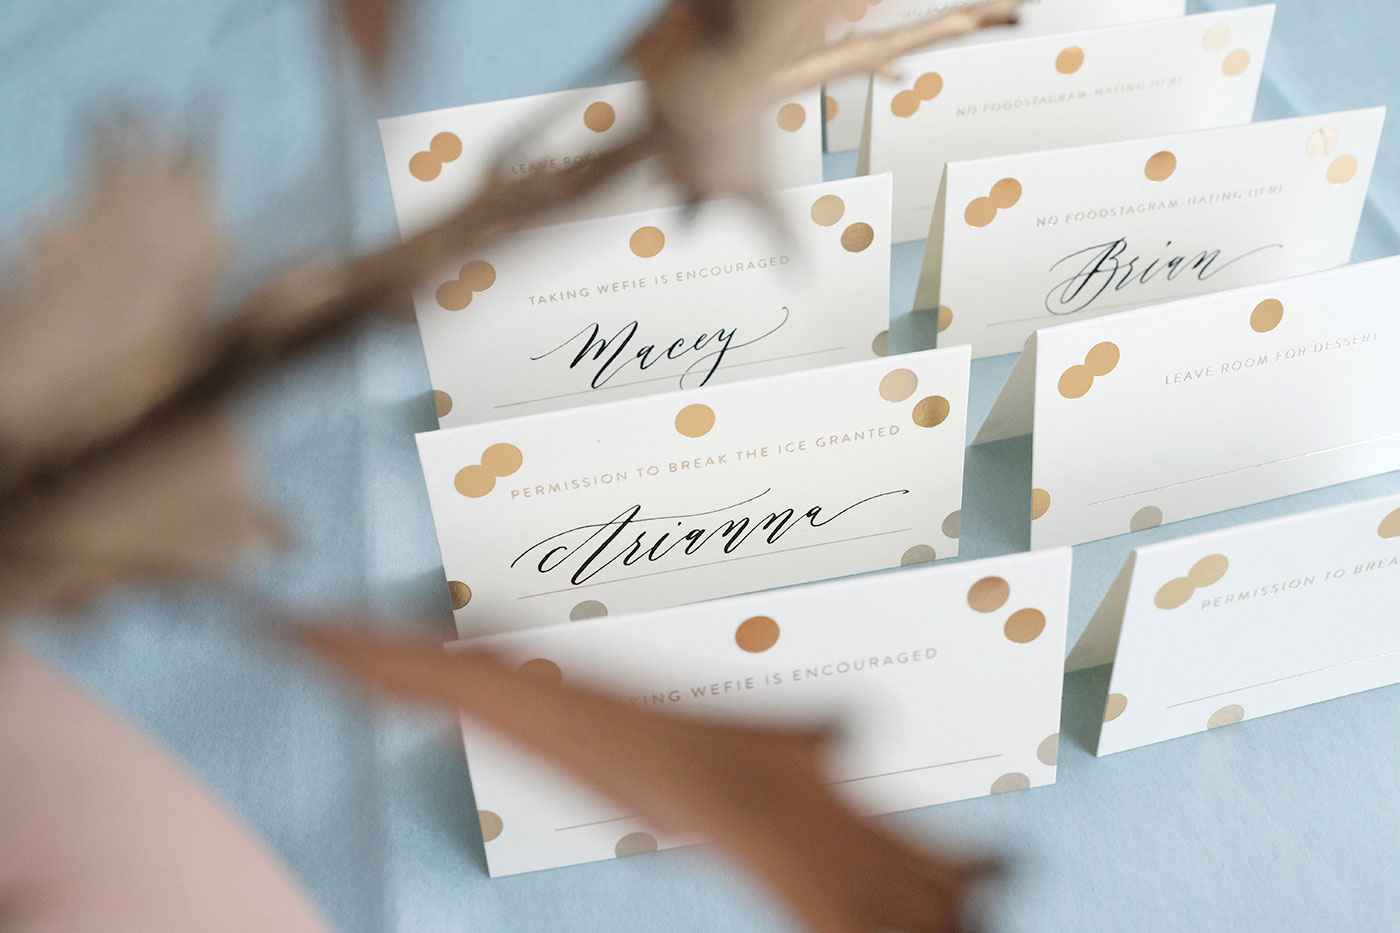 Paper Provision Calligraphy & Photo Styling gallery image